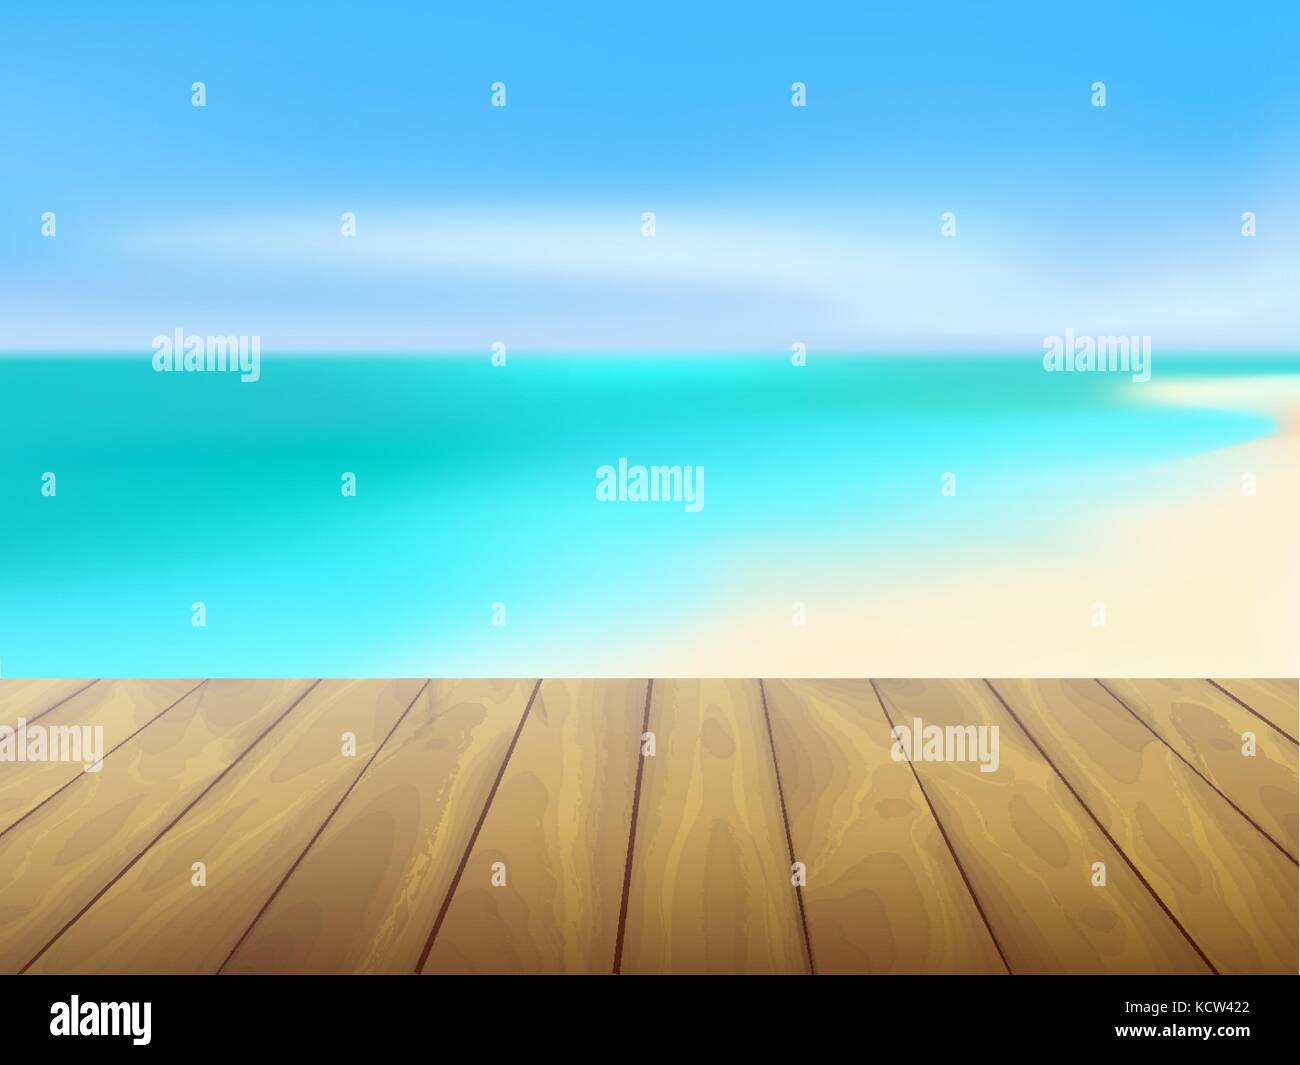 Beautiful sea view and wood planks floor background, Vector illustration Stock Vector